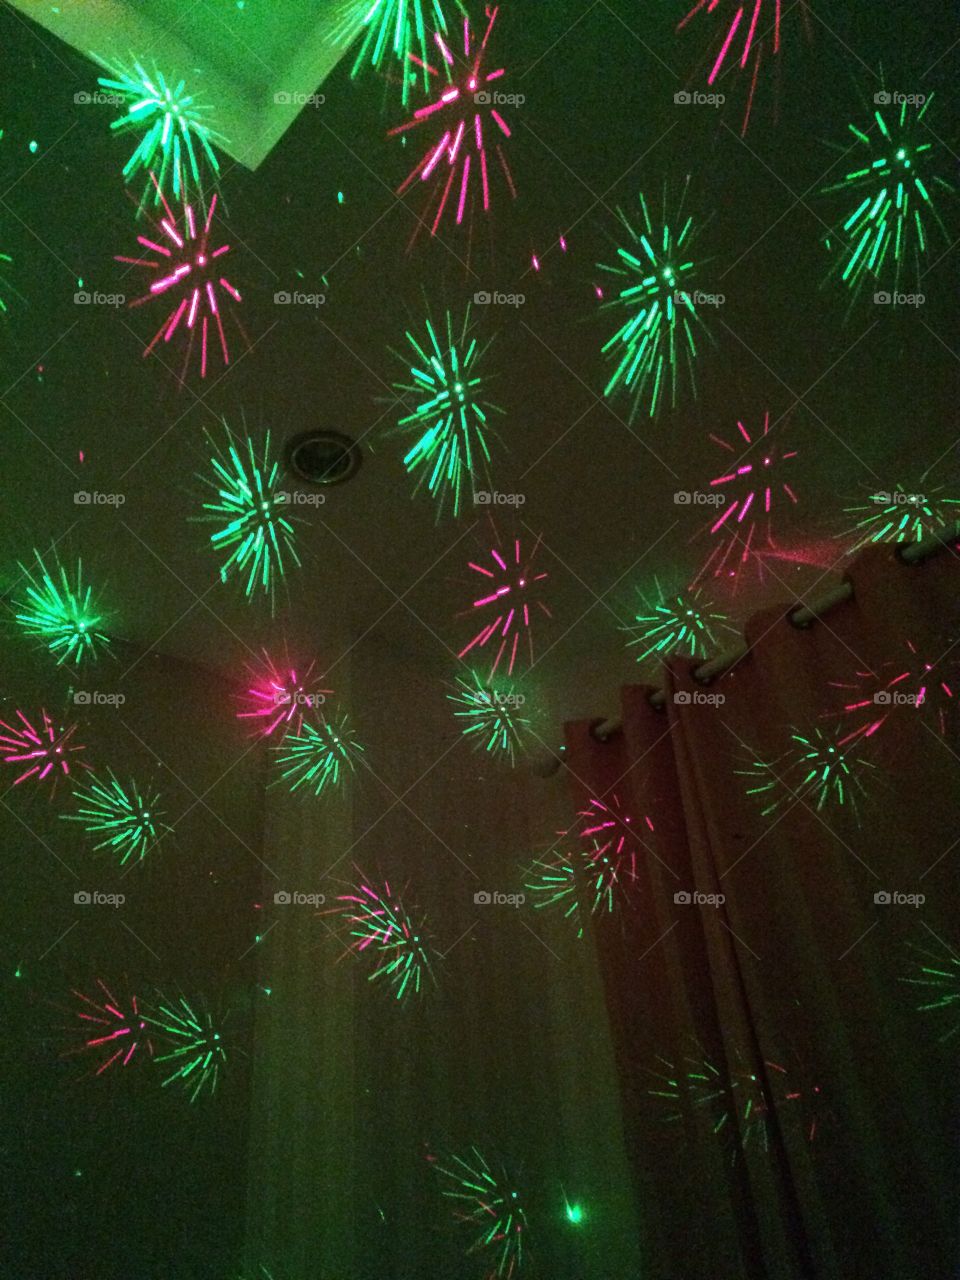 Lights for the party